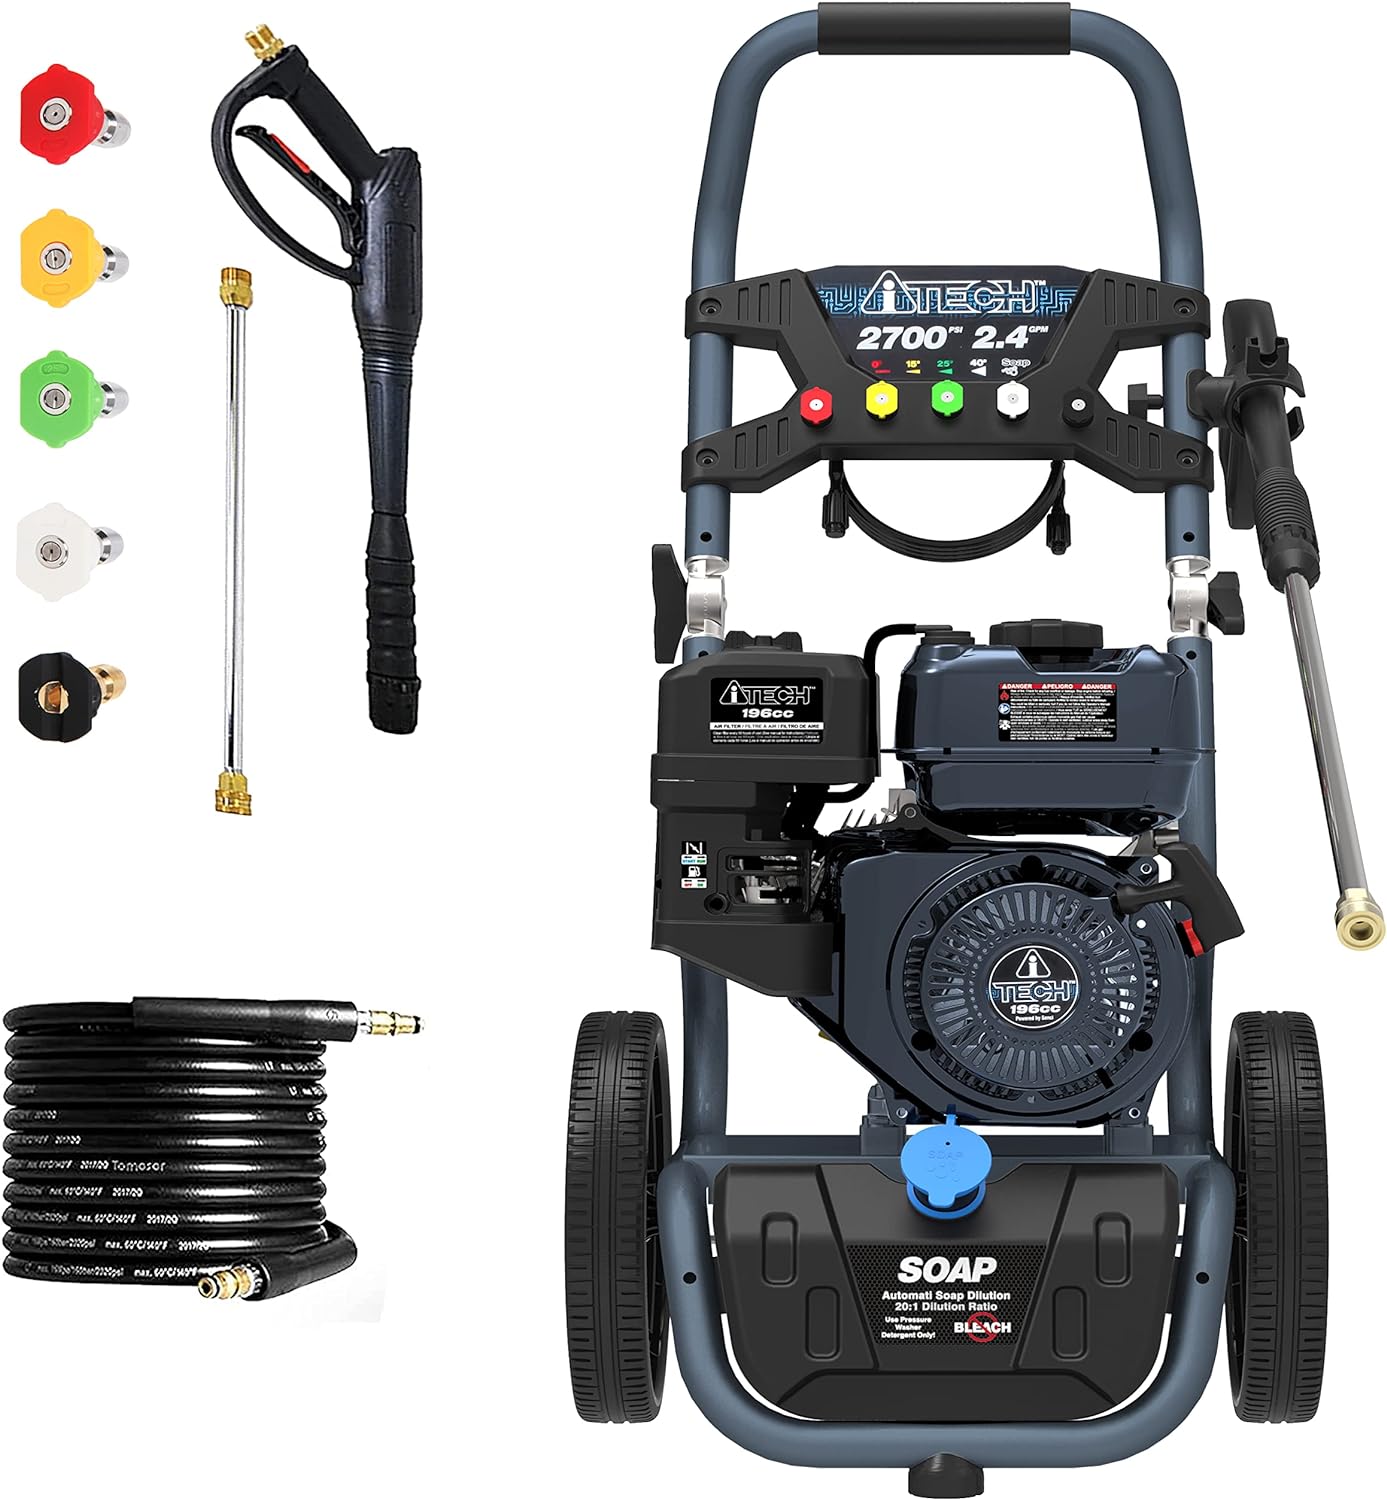 AT30-127001 Gas Powered Pressure Washer 2700 PSI & 2.4 GPM On-Board Soap Tank - $165